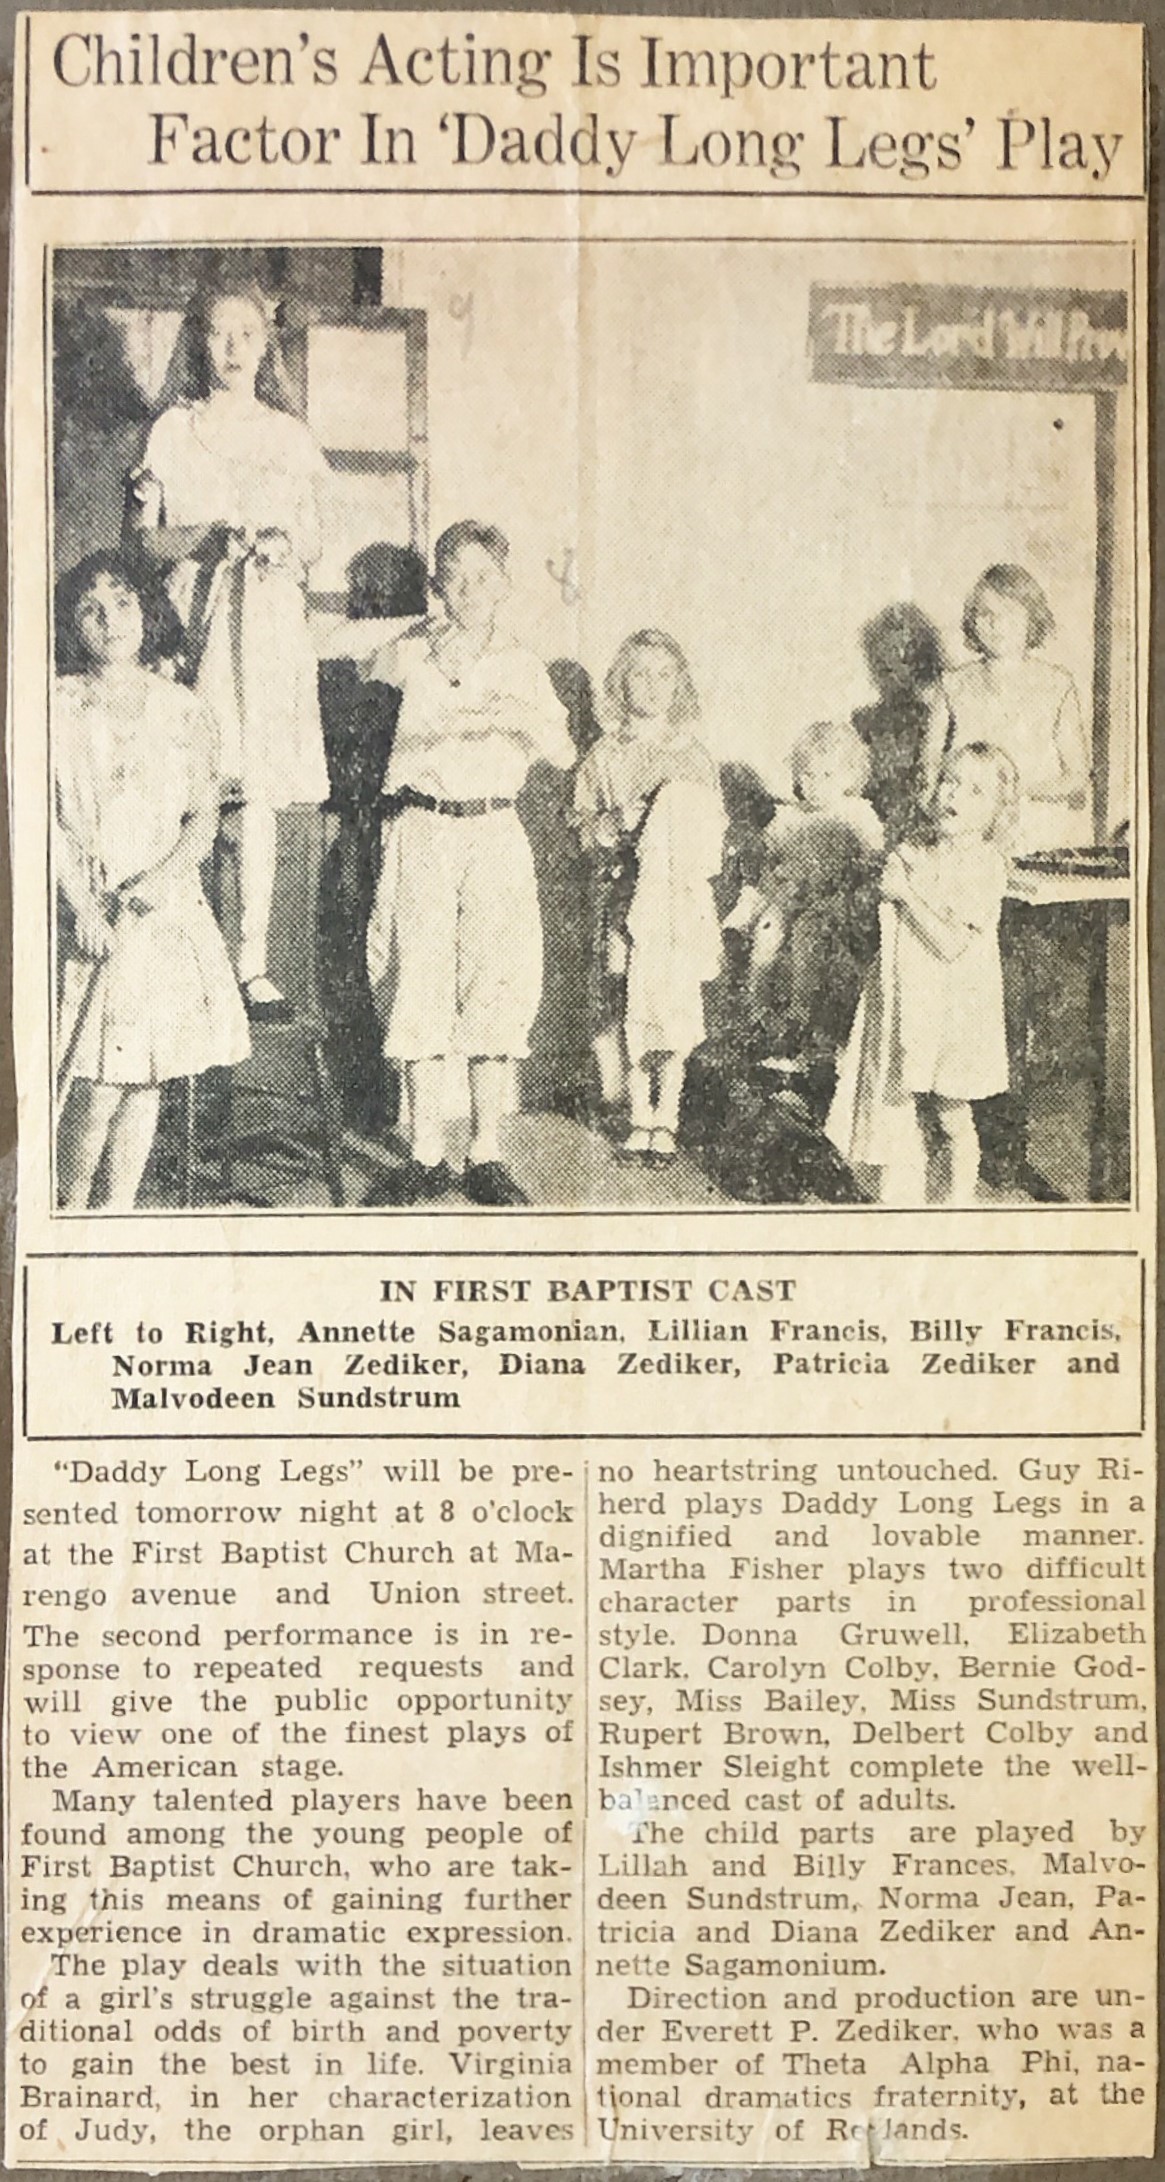  Lillian Jean Francis (Robins) and James William Francis, Jr.  Bob and his siblings were active at the First Baptist Church of Pasadena. Lillian and Bill participated in various theatrical activities sponsored by the church. Their father, Jim, was th